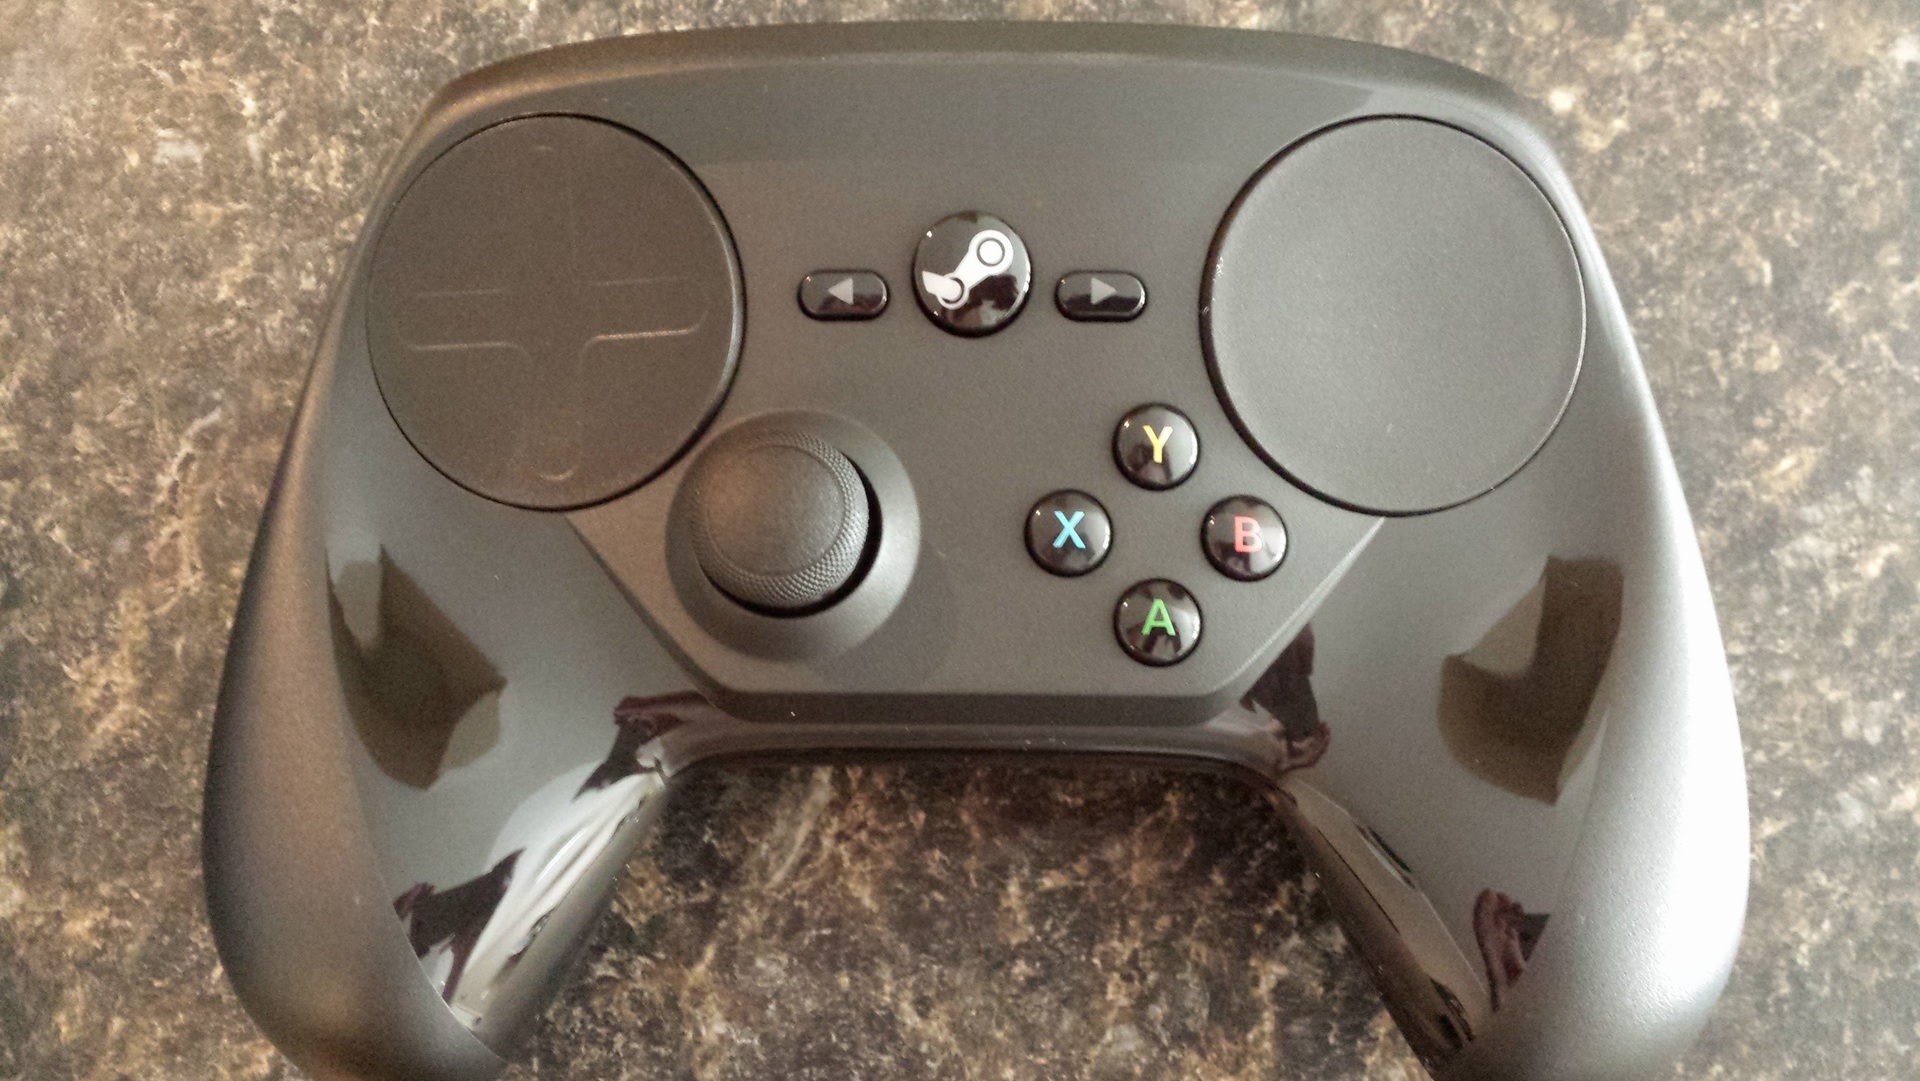 android steam link controller